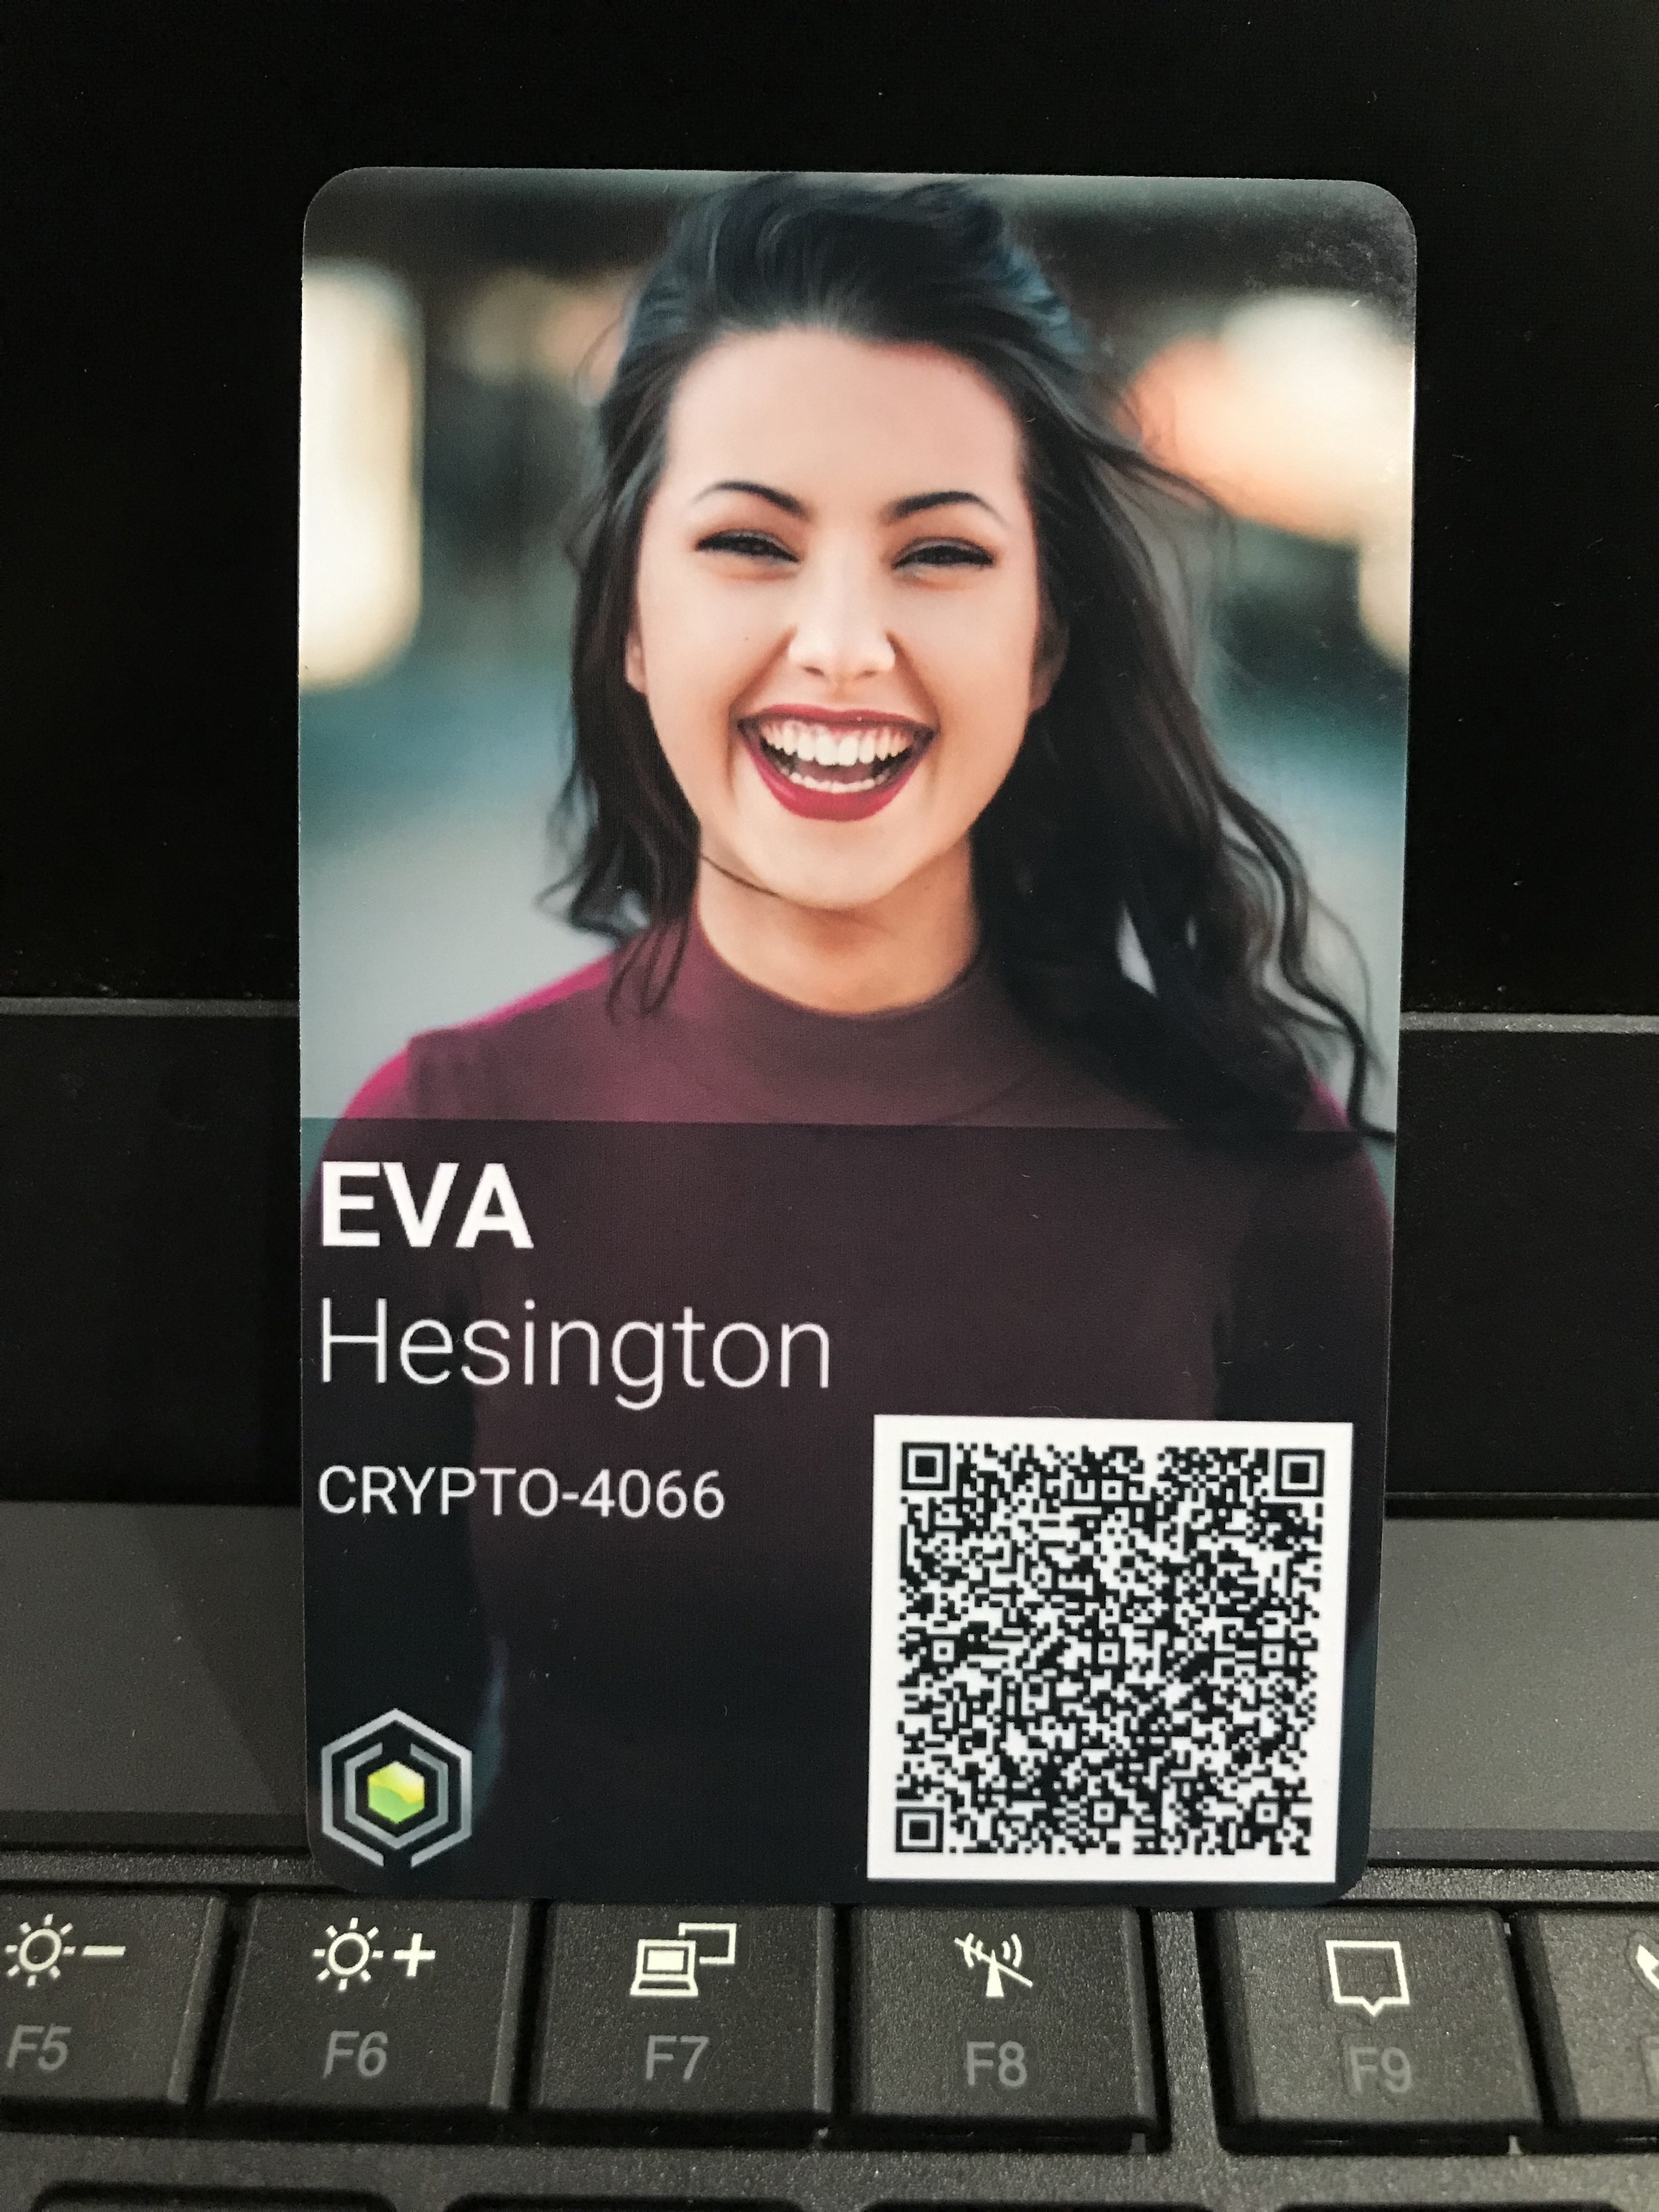 Picture of Eva Hesington's Company ID with a QR Code